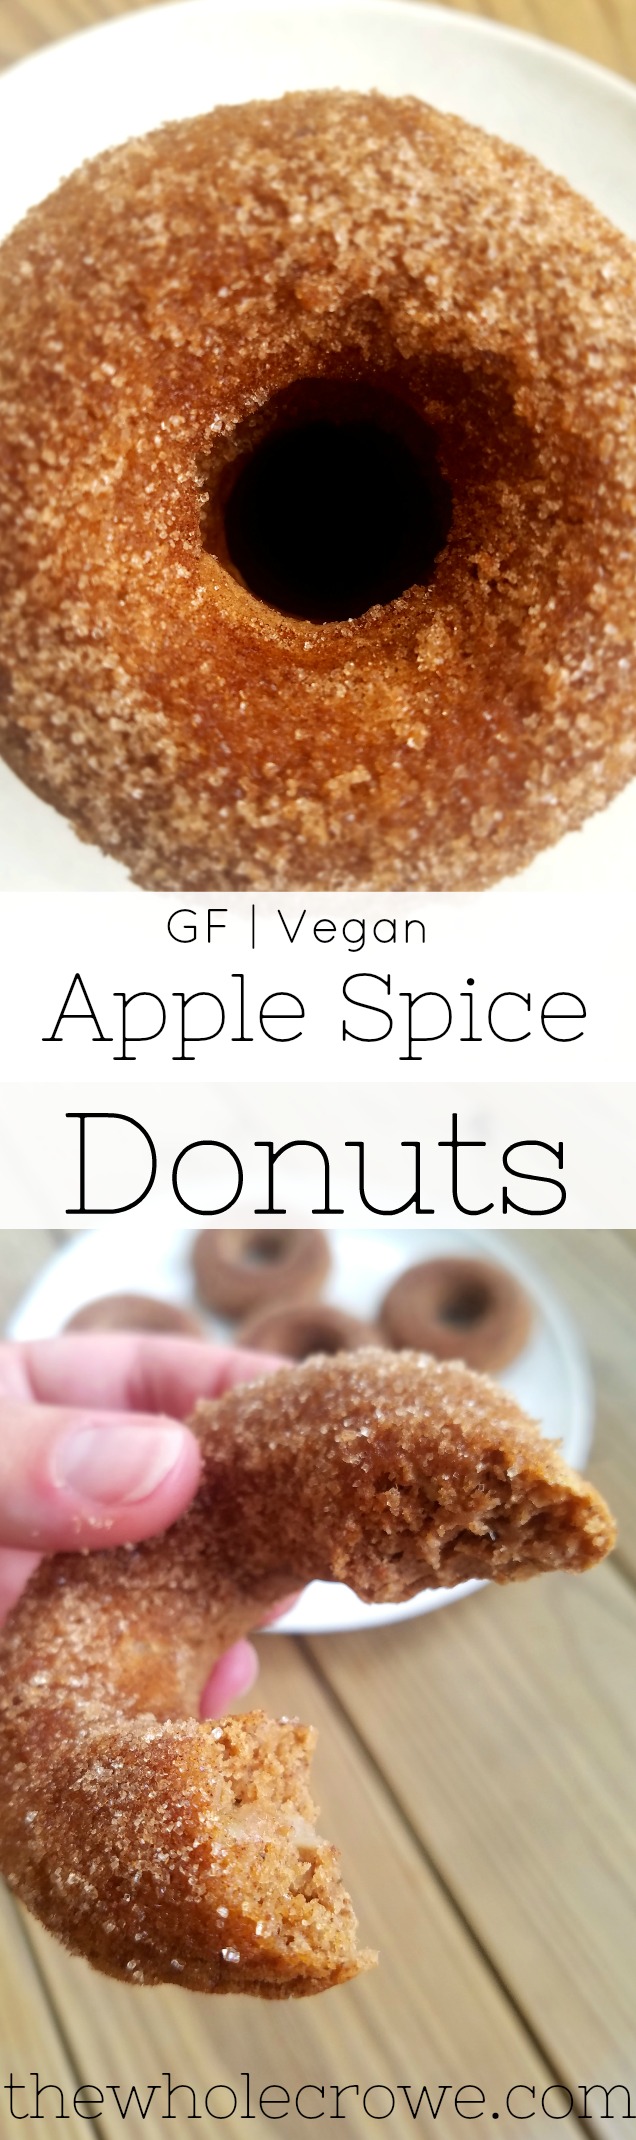 apple spice donuts